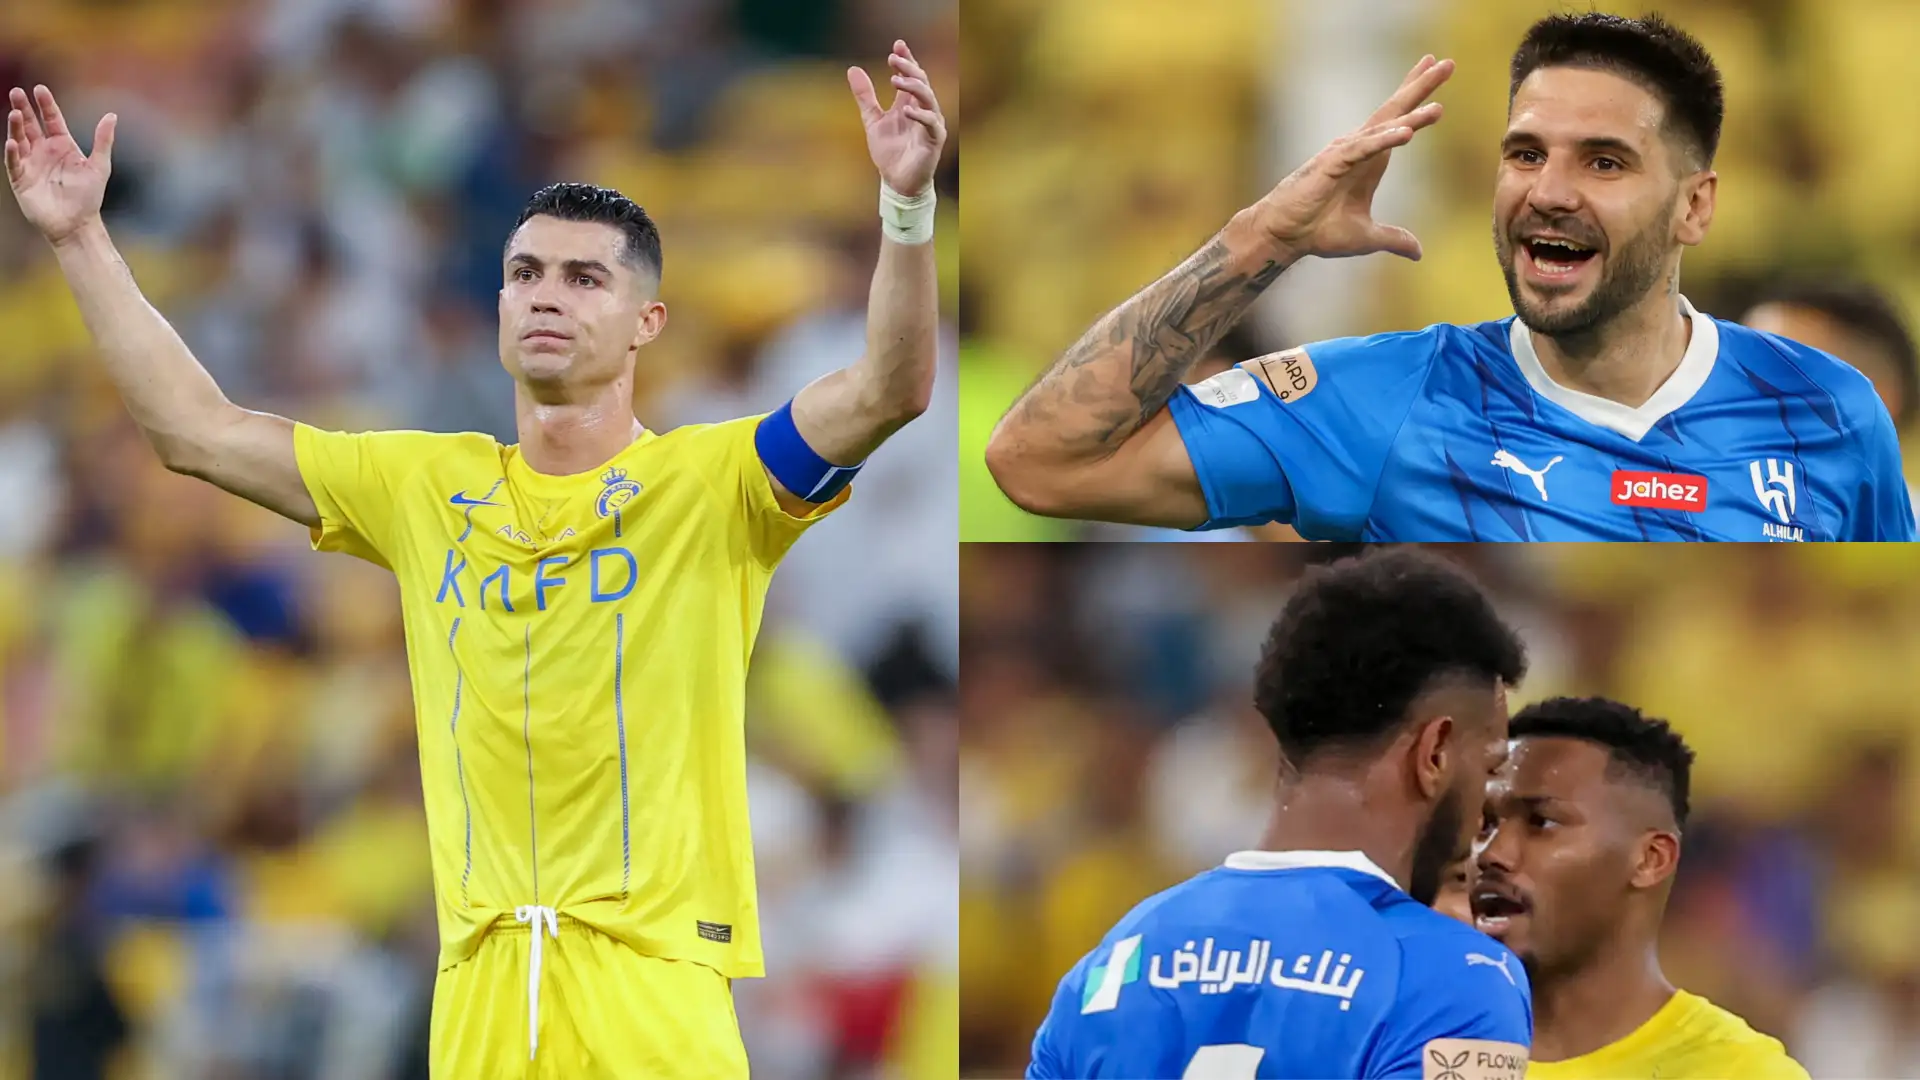 A lucky escape for Al-Hilal! Cristiano Ronaldo's Al-Nassr beaten to another trophy on penalties despite rivals’ incredible collapse in feisty King’s Cup final that saw three players sent off